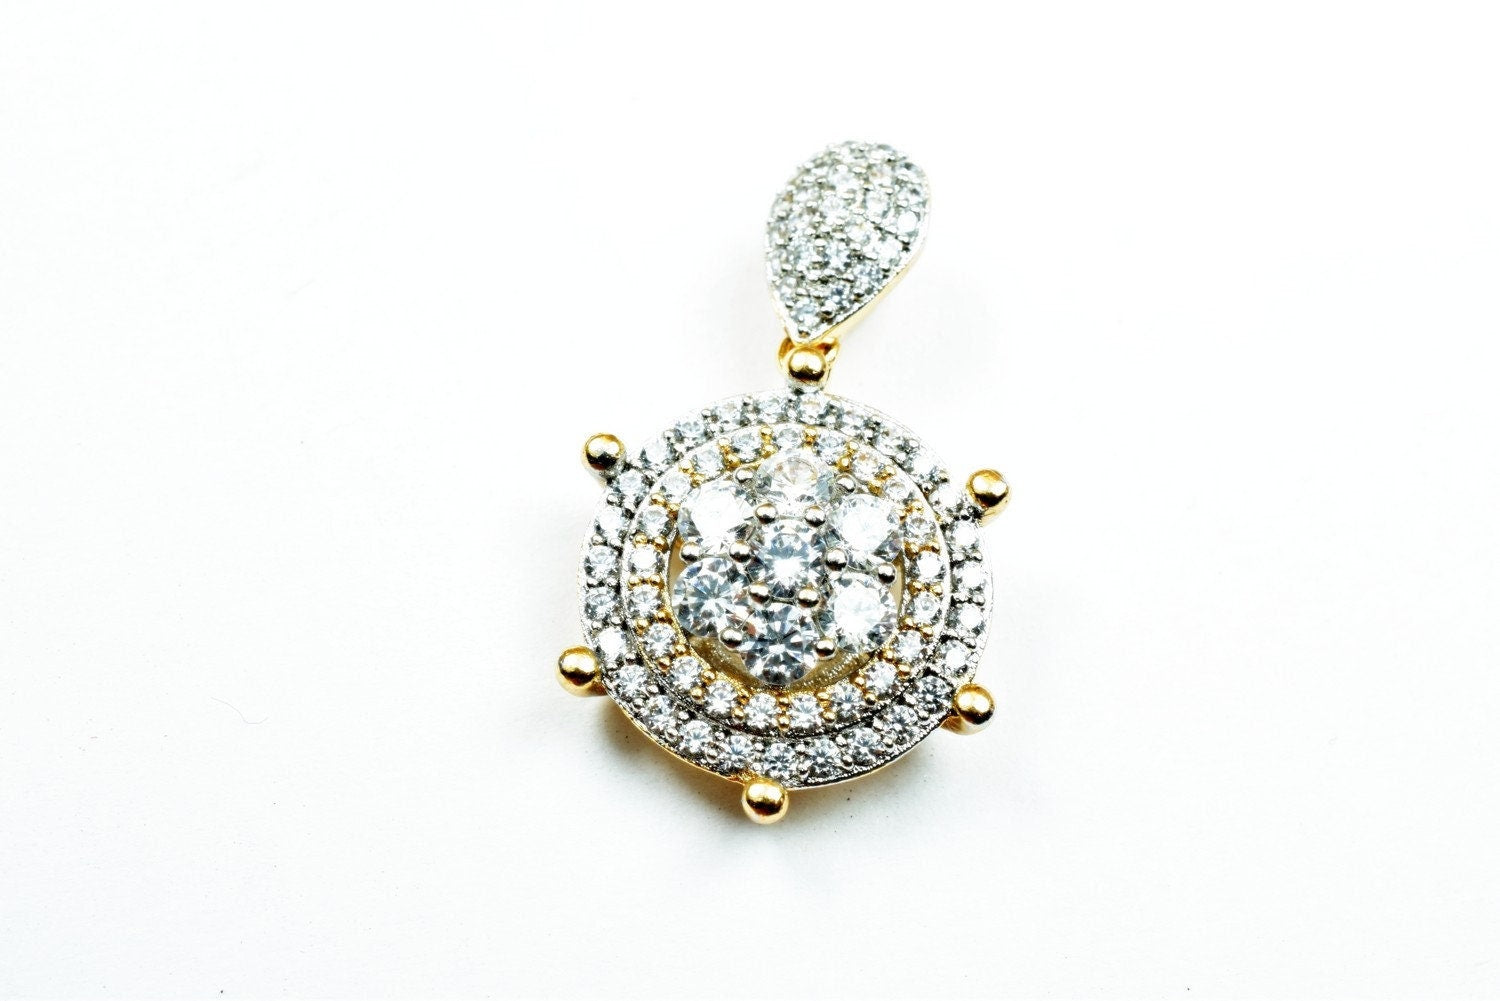 18k gold filled rhinestone cz cubic zirconia flower round pendant size 20x16mm with cz bail pendant charm for necklace jewelry making gp147